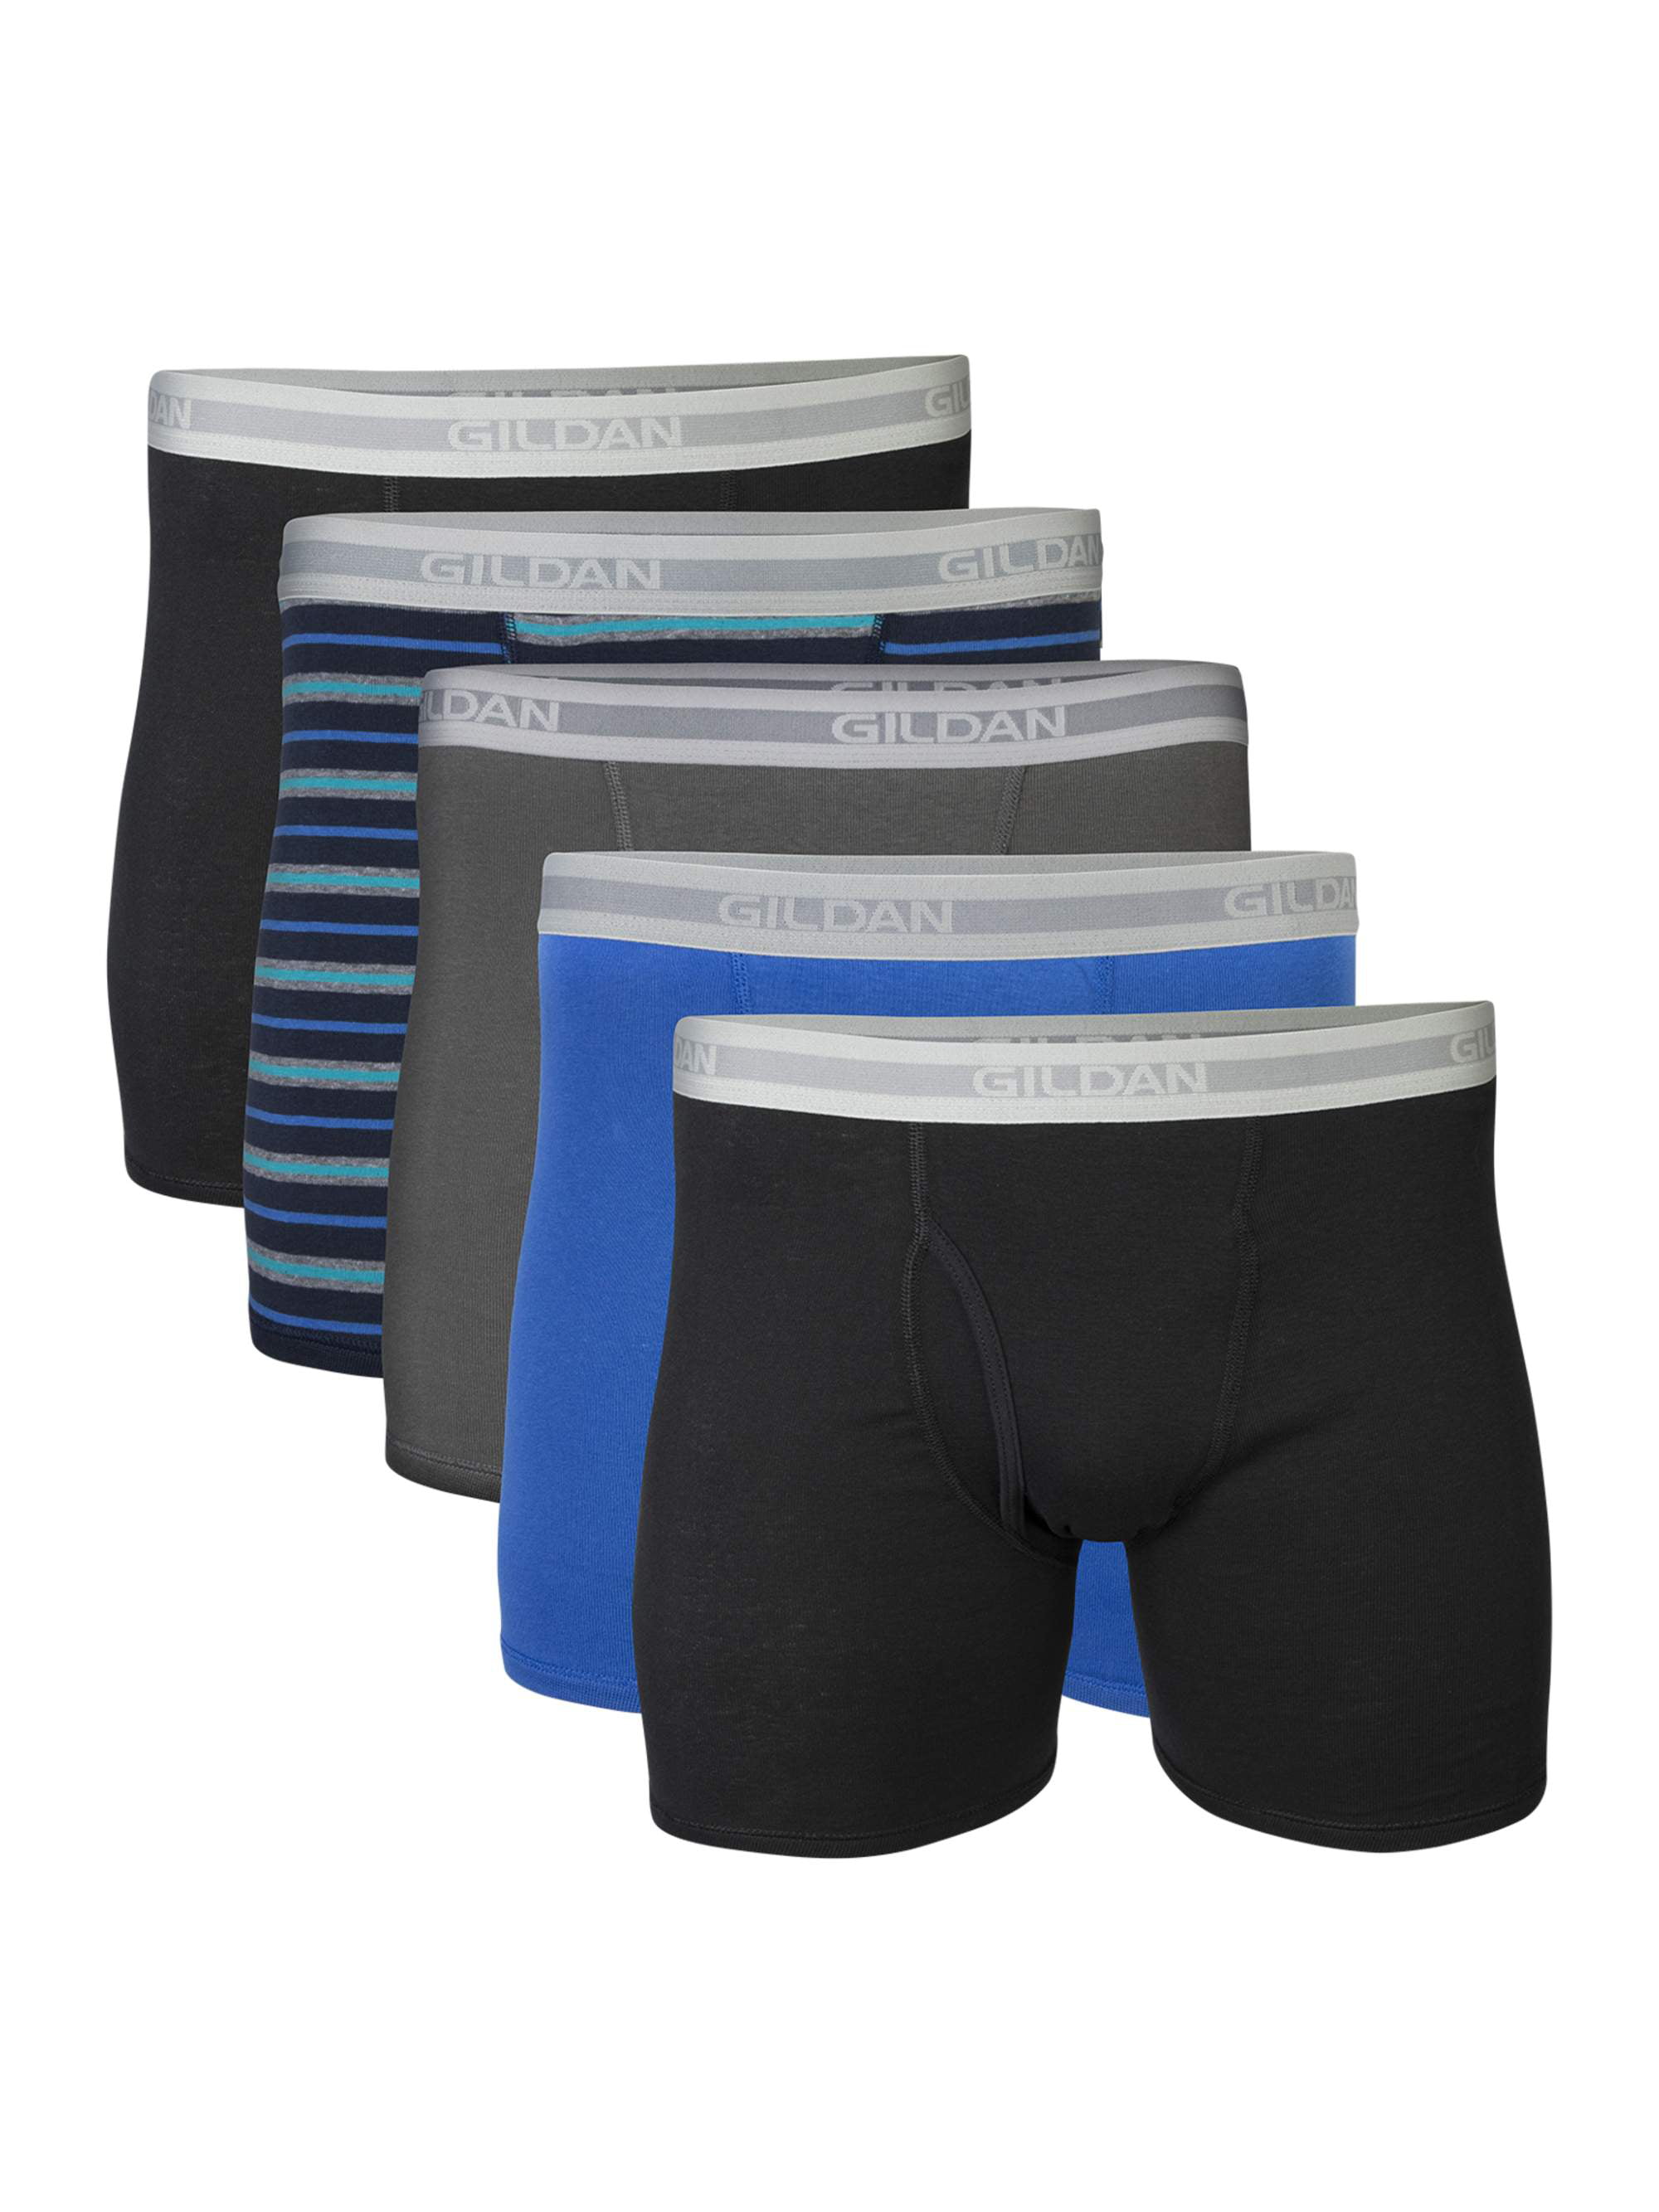 Lower East Mens Boxer Shorts Pack of 3